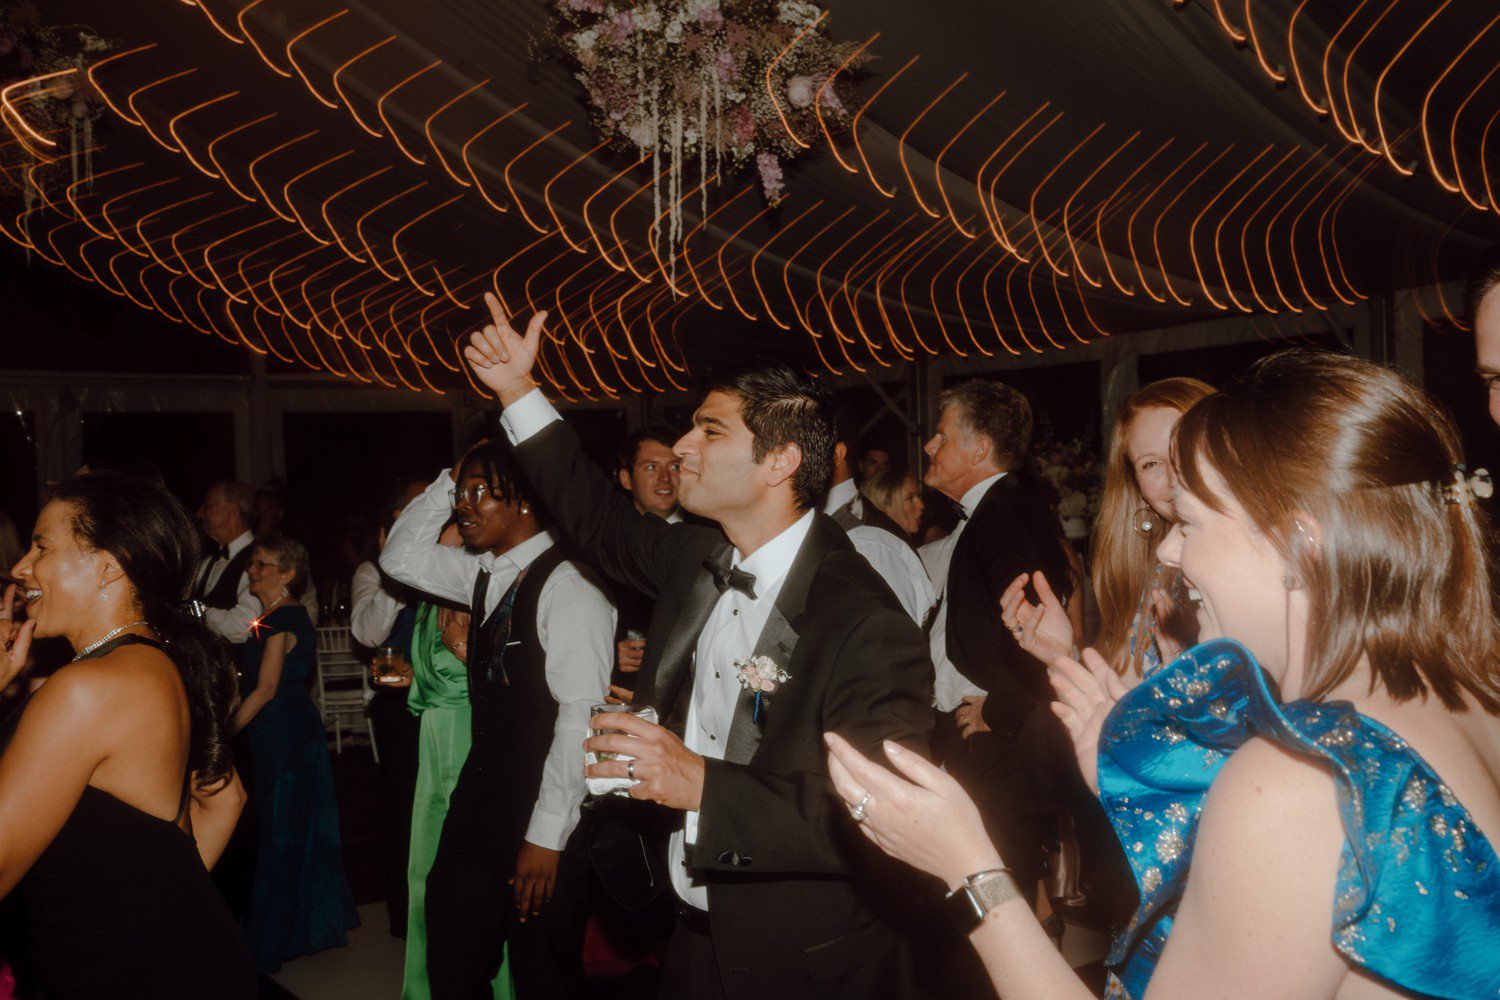 Guests dancing during wedding reception. 